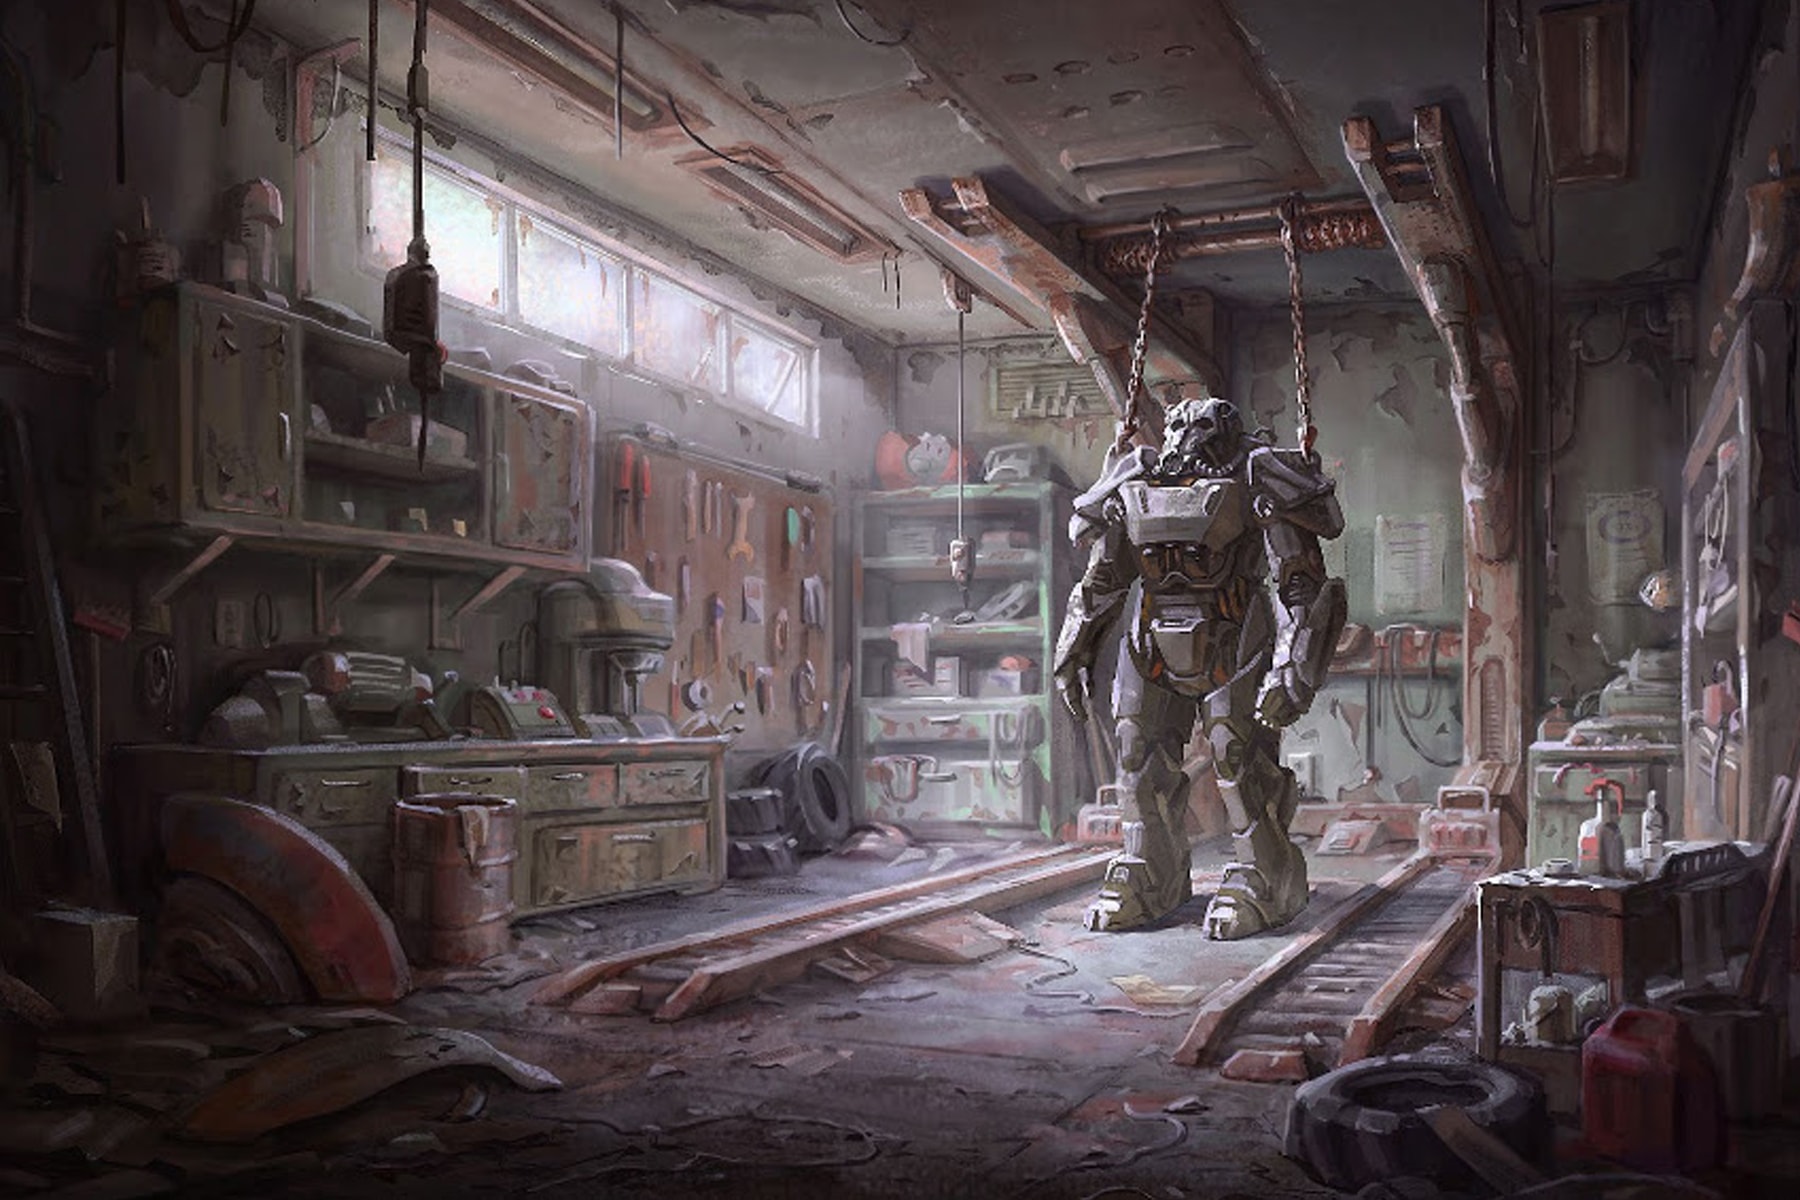 Illustration of a Fallout 4 power armor garage, a dusty workshop filled with tools and an armor suspended from the ceiling